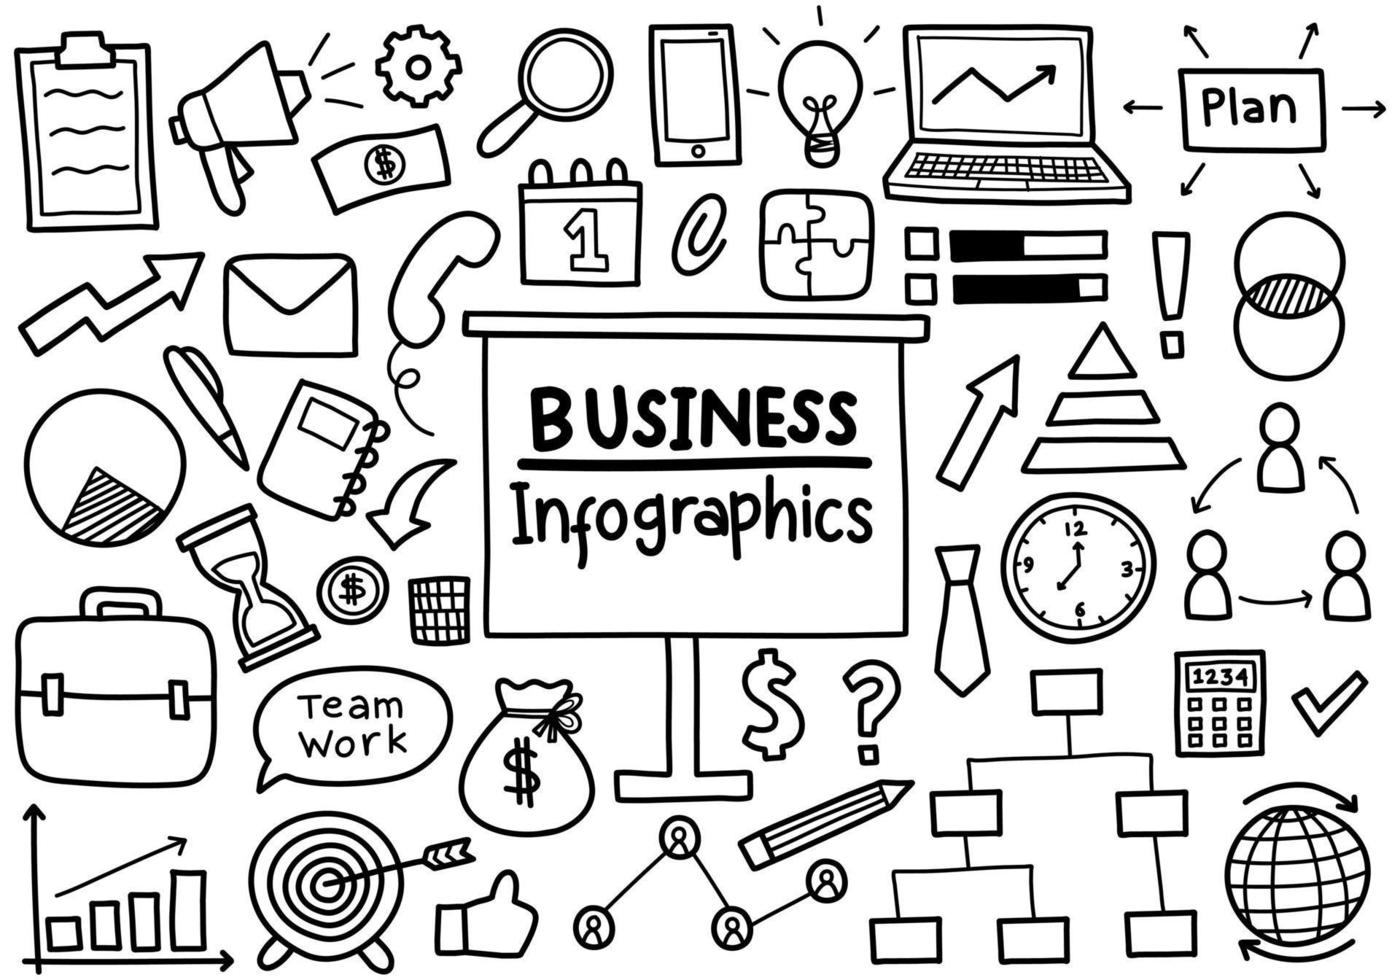 Business Infographic Doodle vector